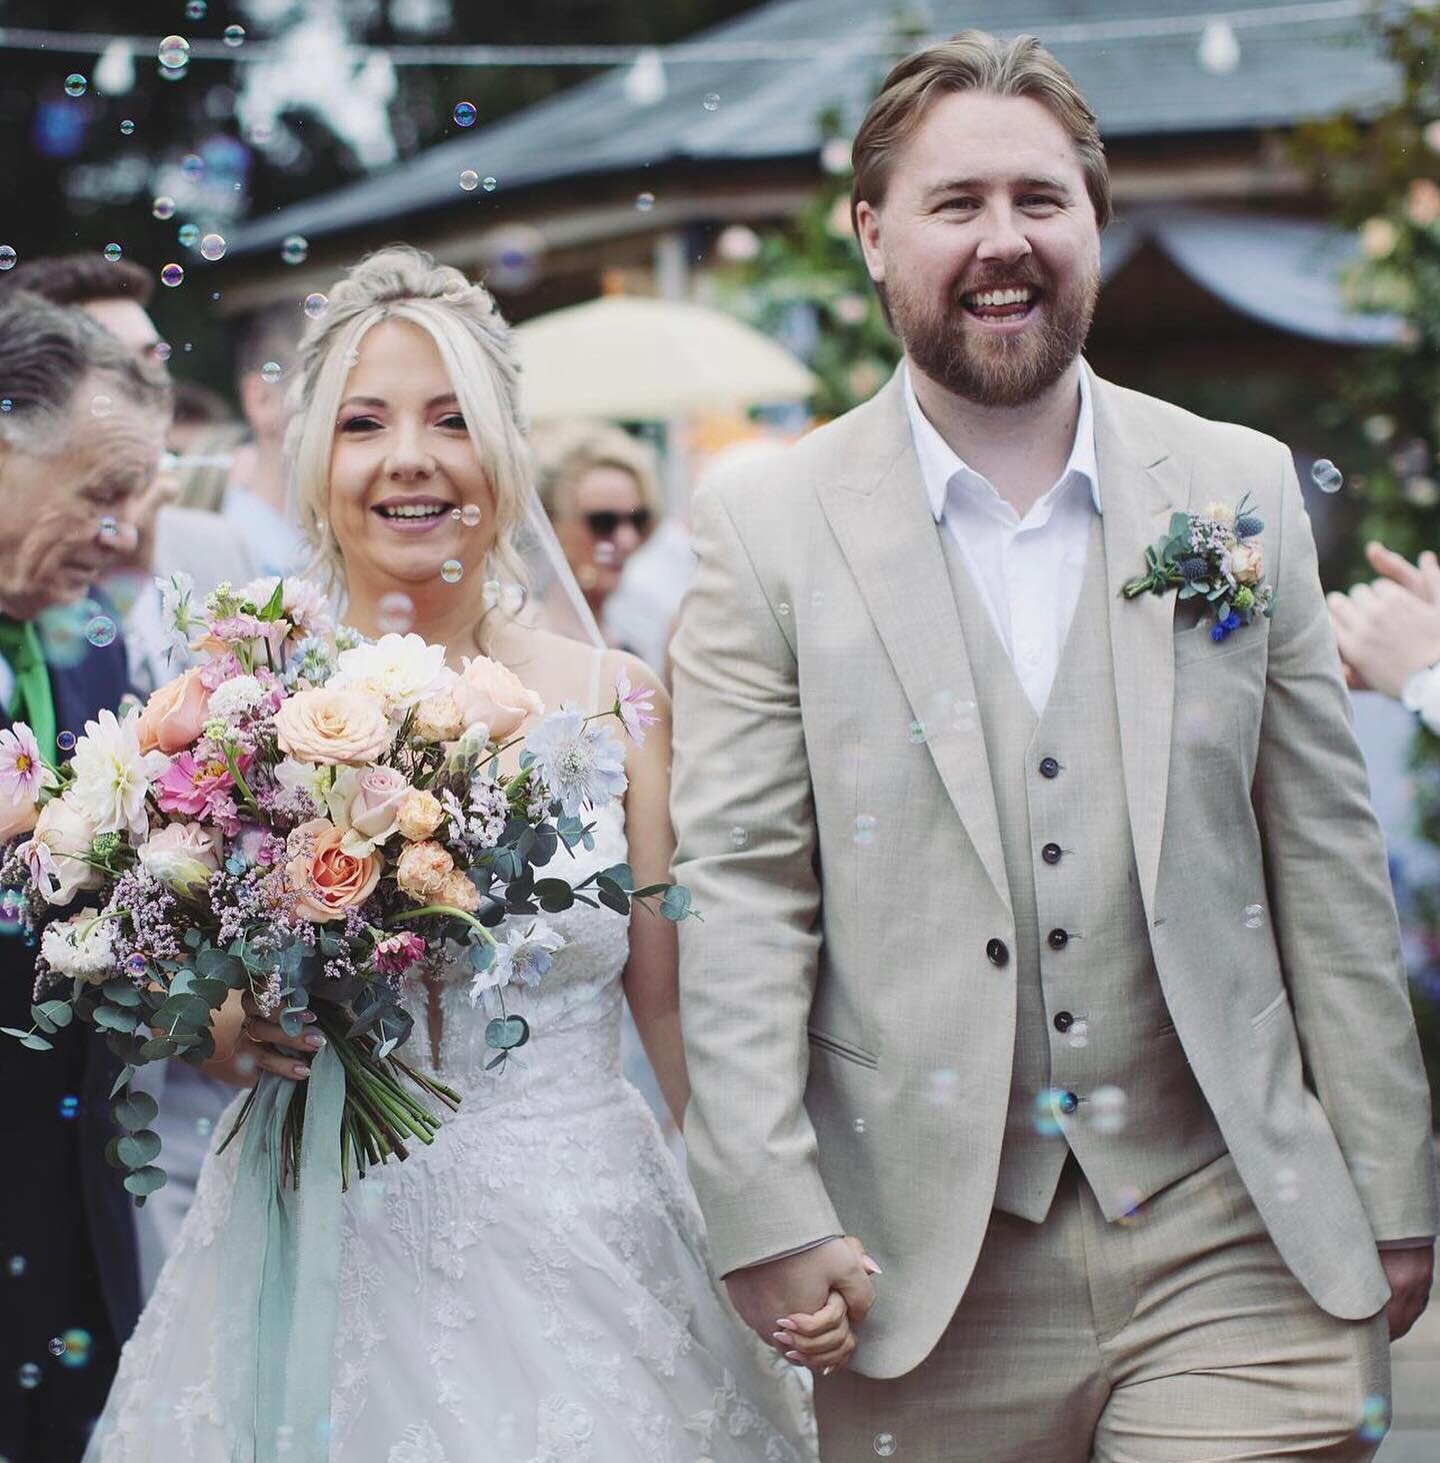 A beautiful &amp; joyous bubble walk for Amber &amp; Lewis was in order after their gorgeous wedding ceremony which not only celebrated their own love &amp; relationship but much more. 
The ceremony included a wonderful ring warming to symbolise the 